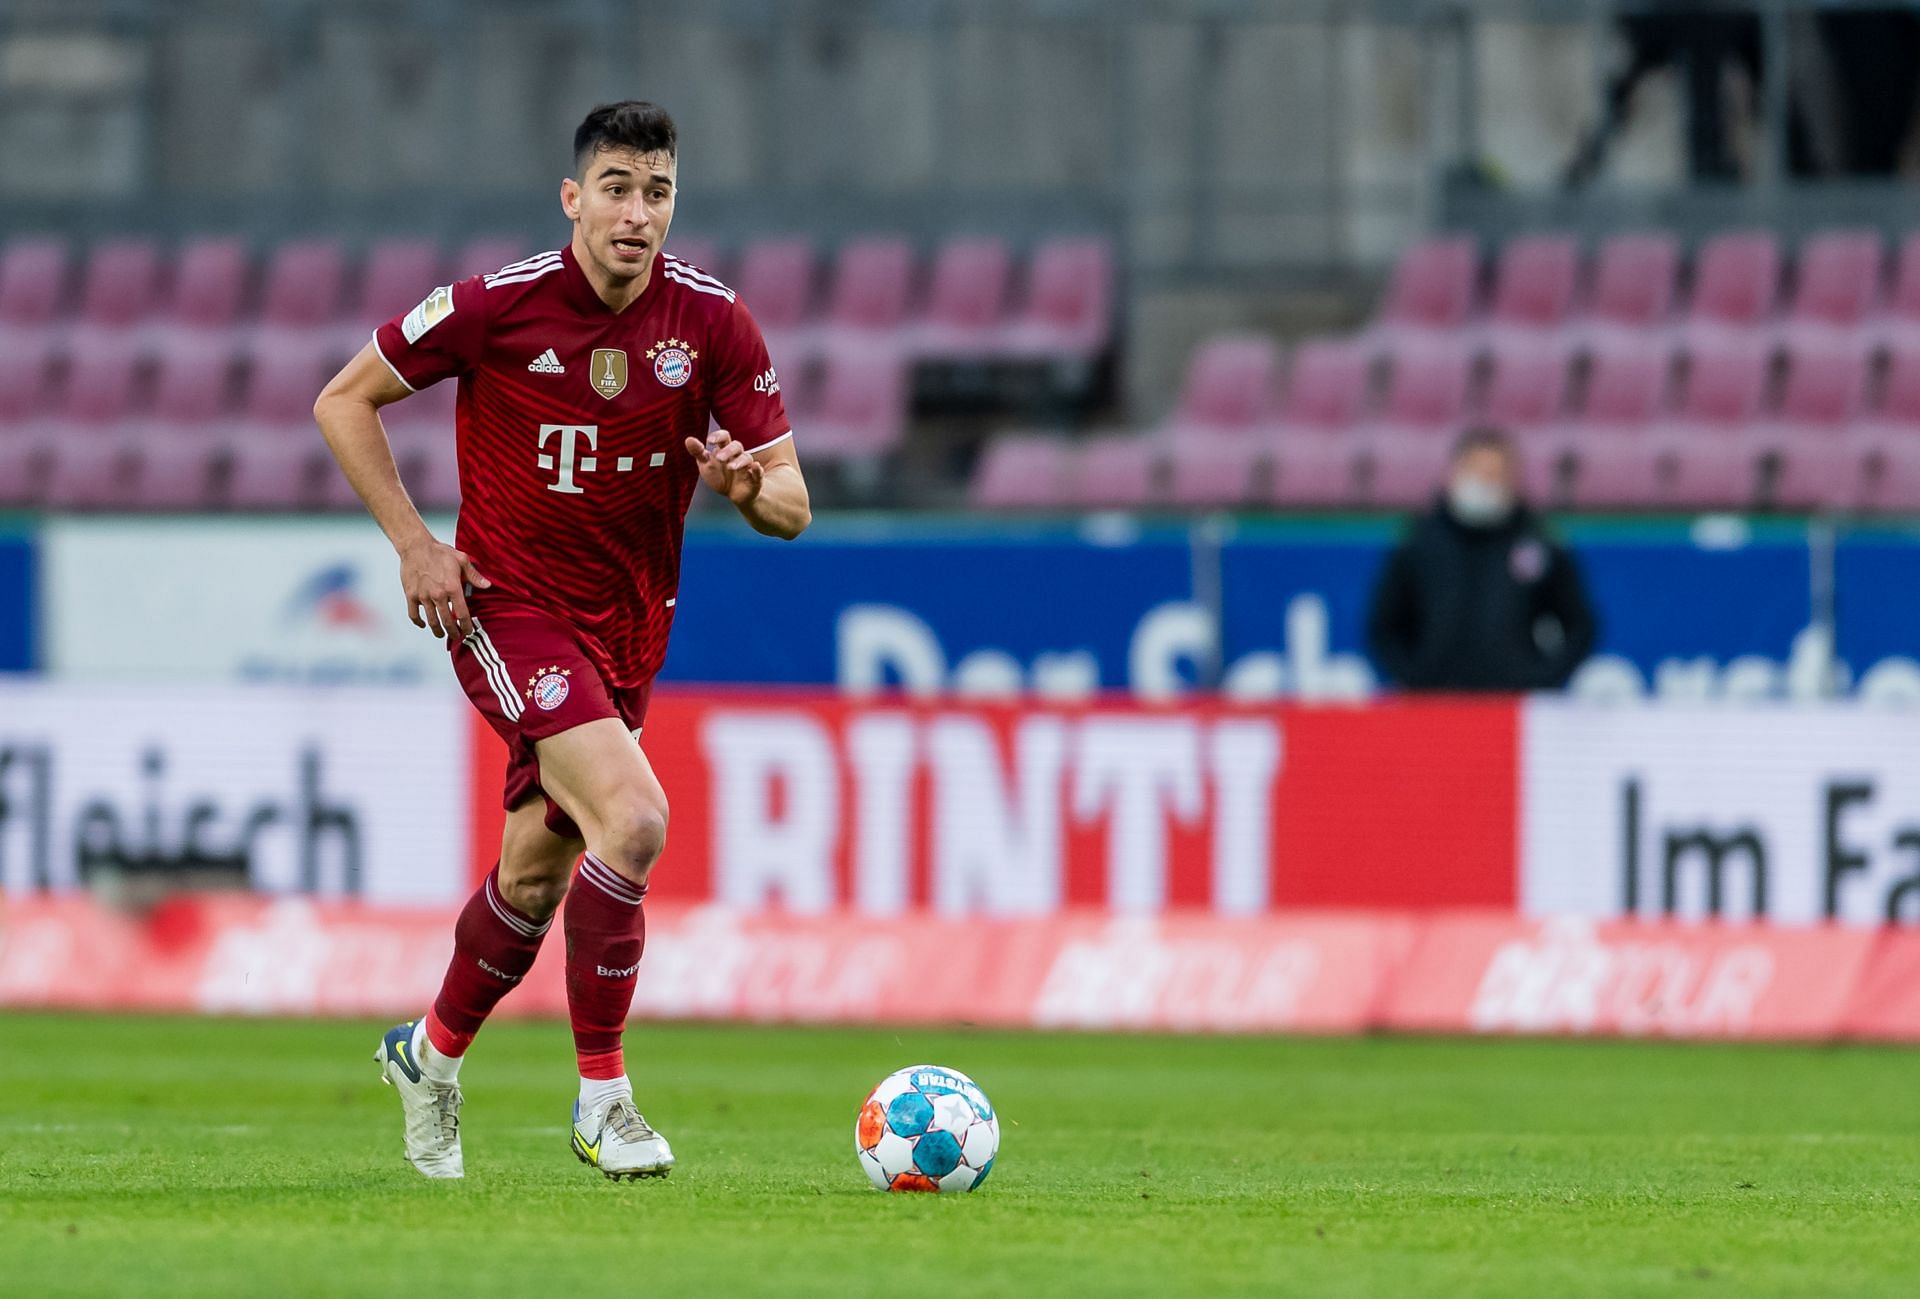 Marc Roca marked his debut with the club on 15th October 2020 in a DFB Pokal fixture